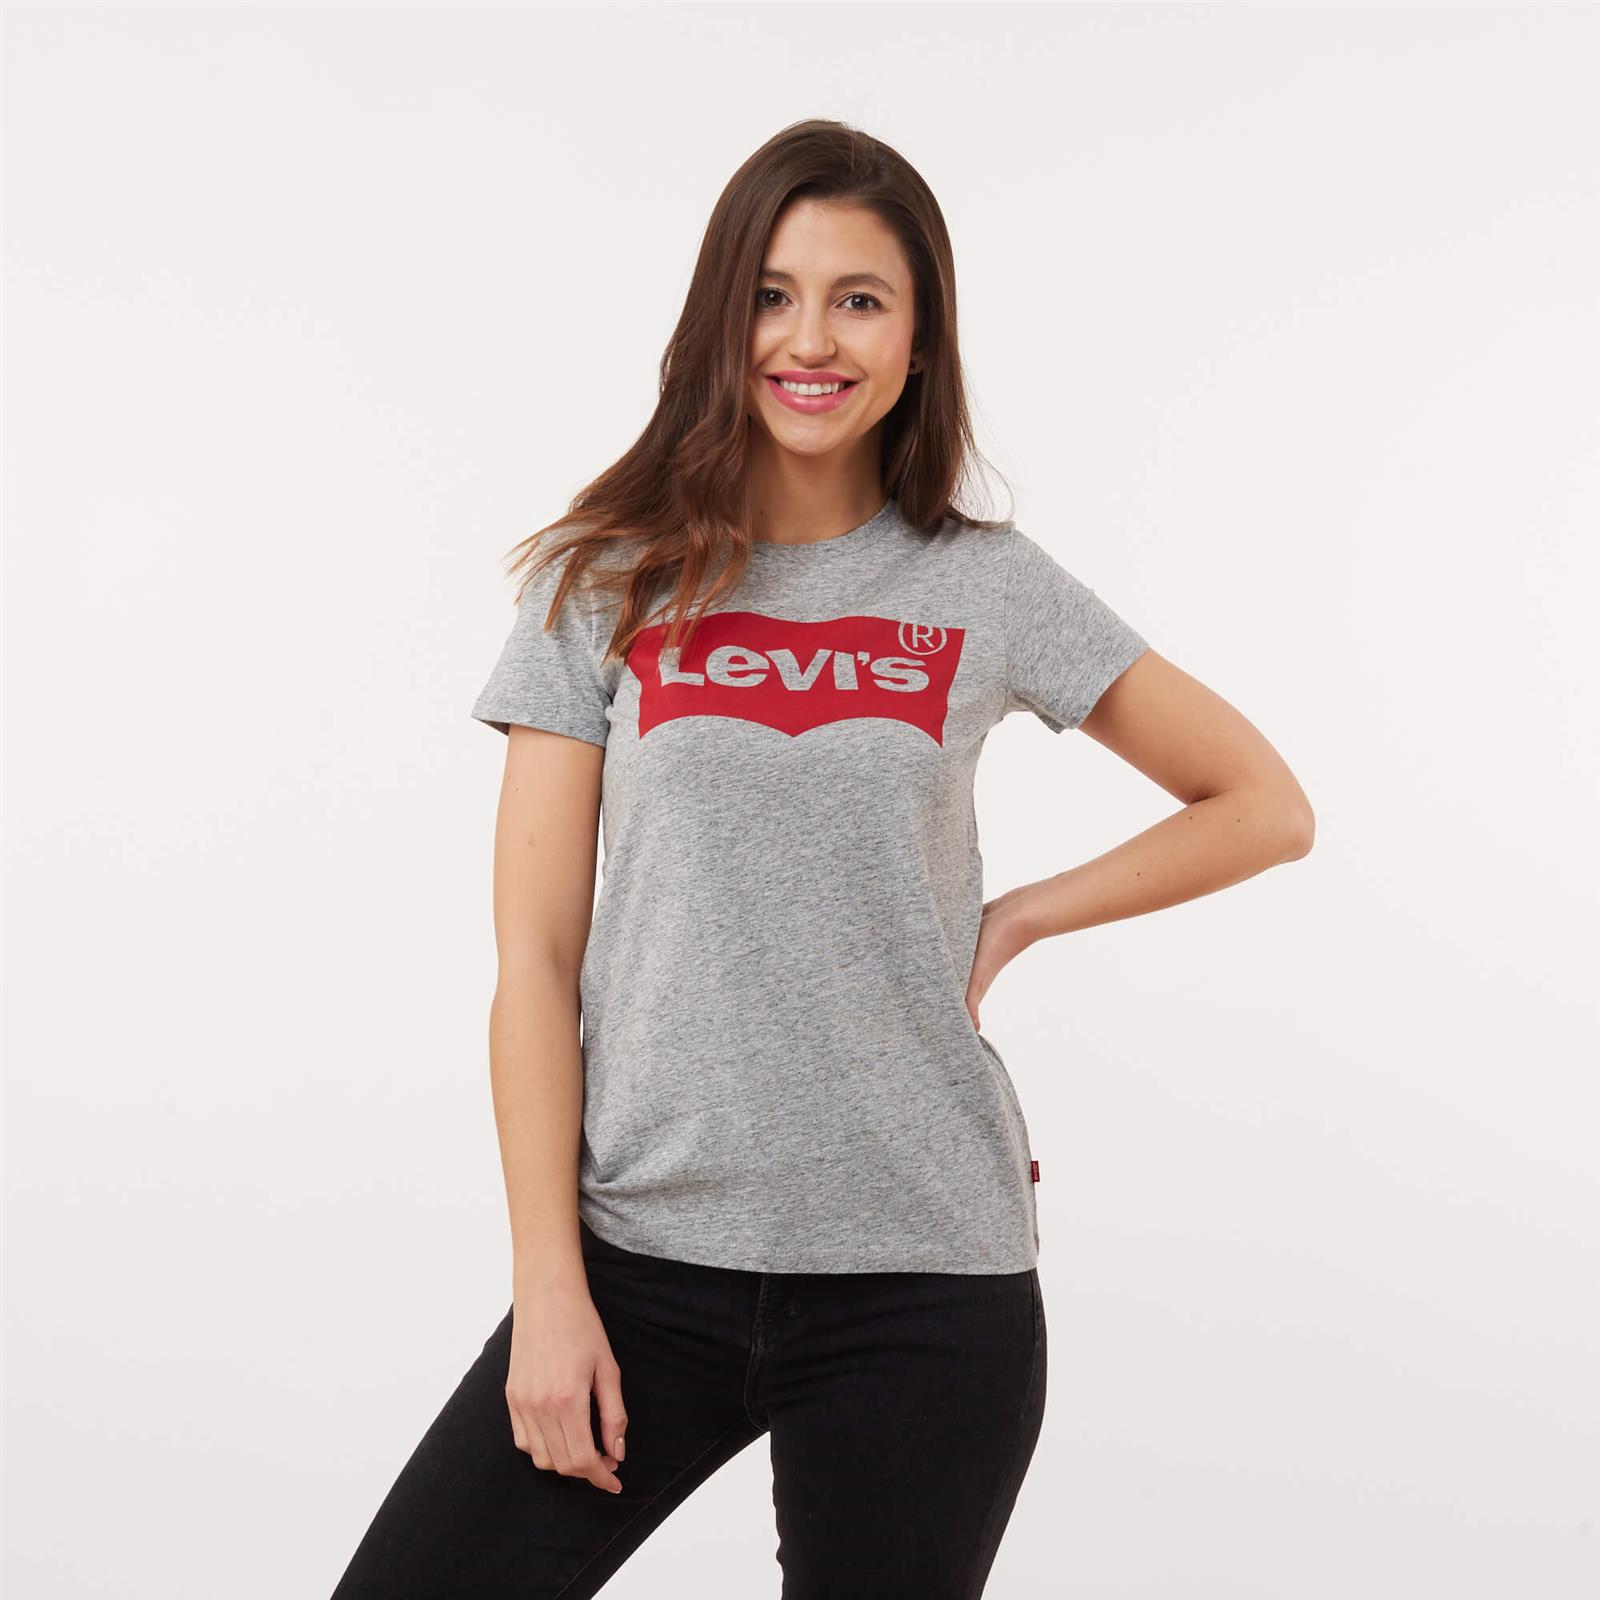 Levi's THE PERFECT GRAPHIC TEE HEATHER GREY | Women's \ Women's clothing \ T -shirts Brands \ #Marki - 3 \ Levi's